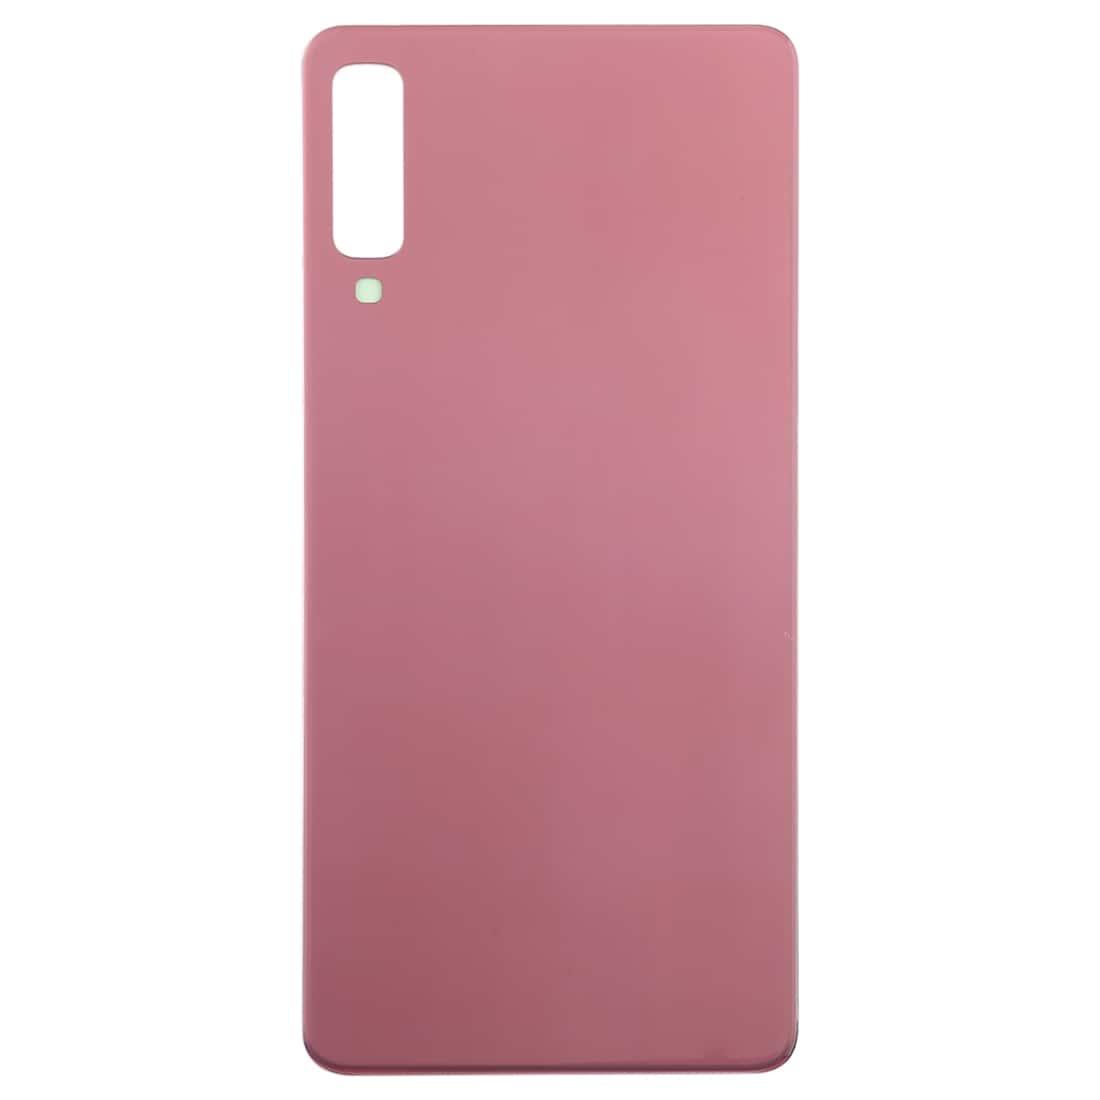 Back Glass Panel for  Samsung Galaxy A7 2018 Pink